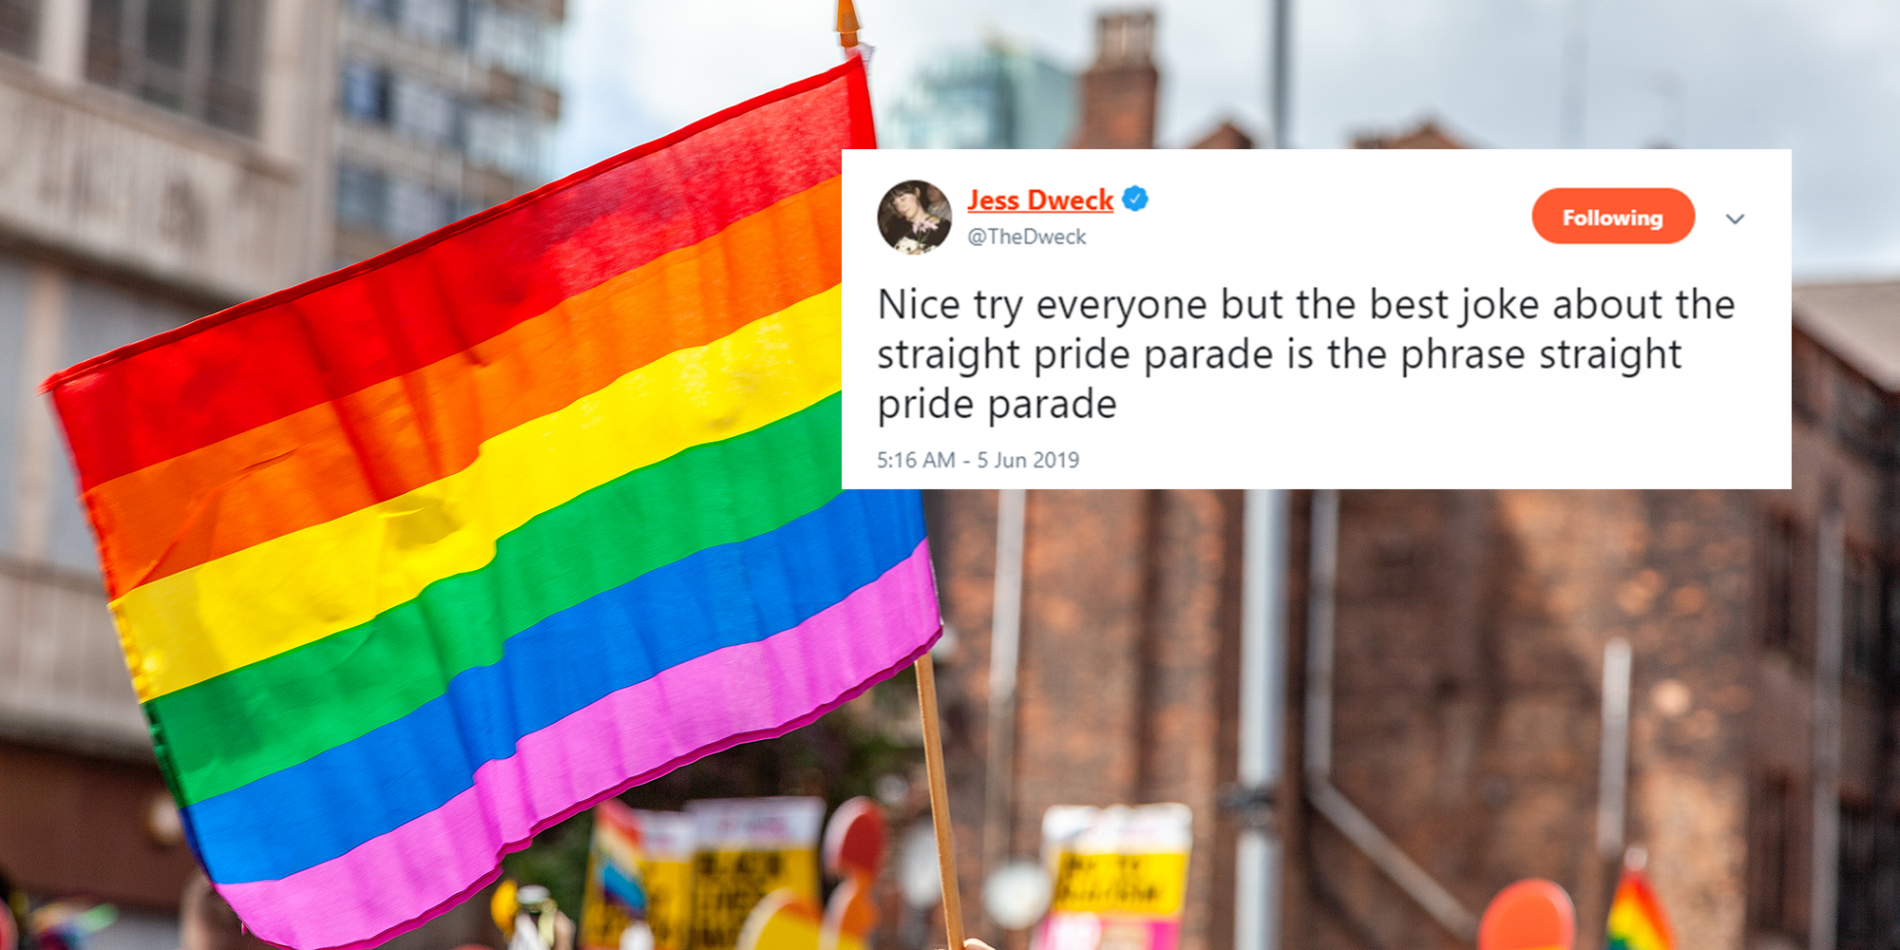 There’s A Straight Pride Parade Intended To Happen In America, And People Are Reacting